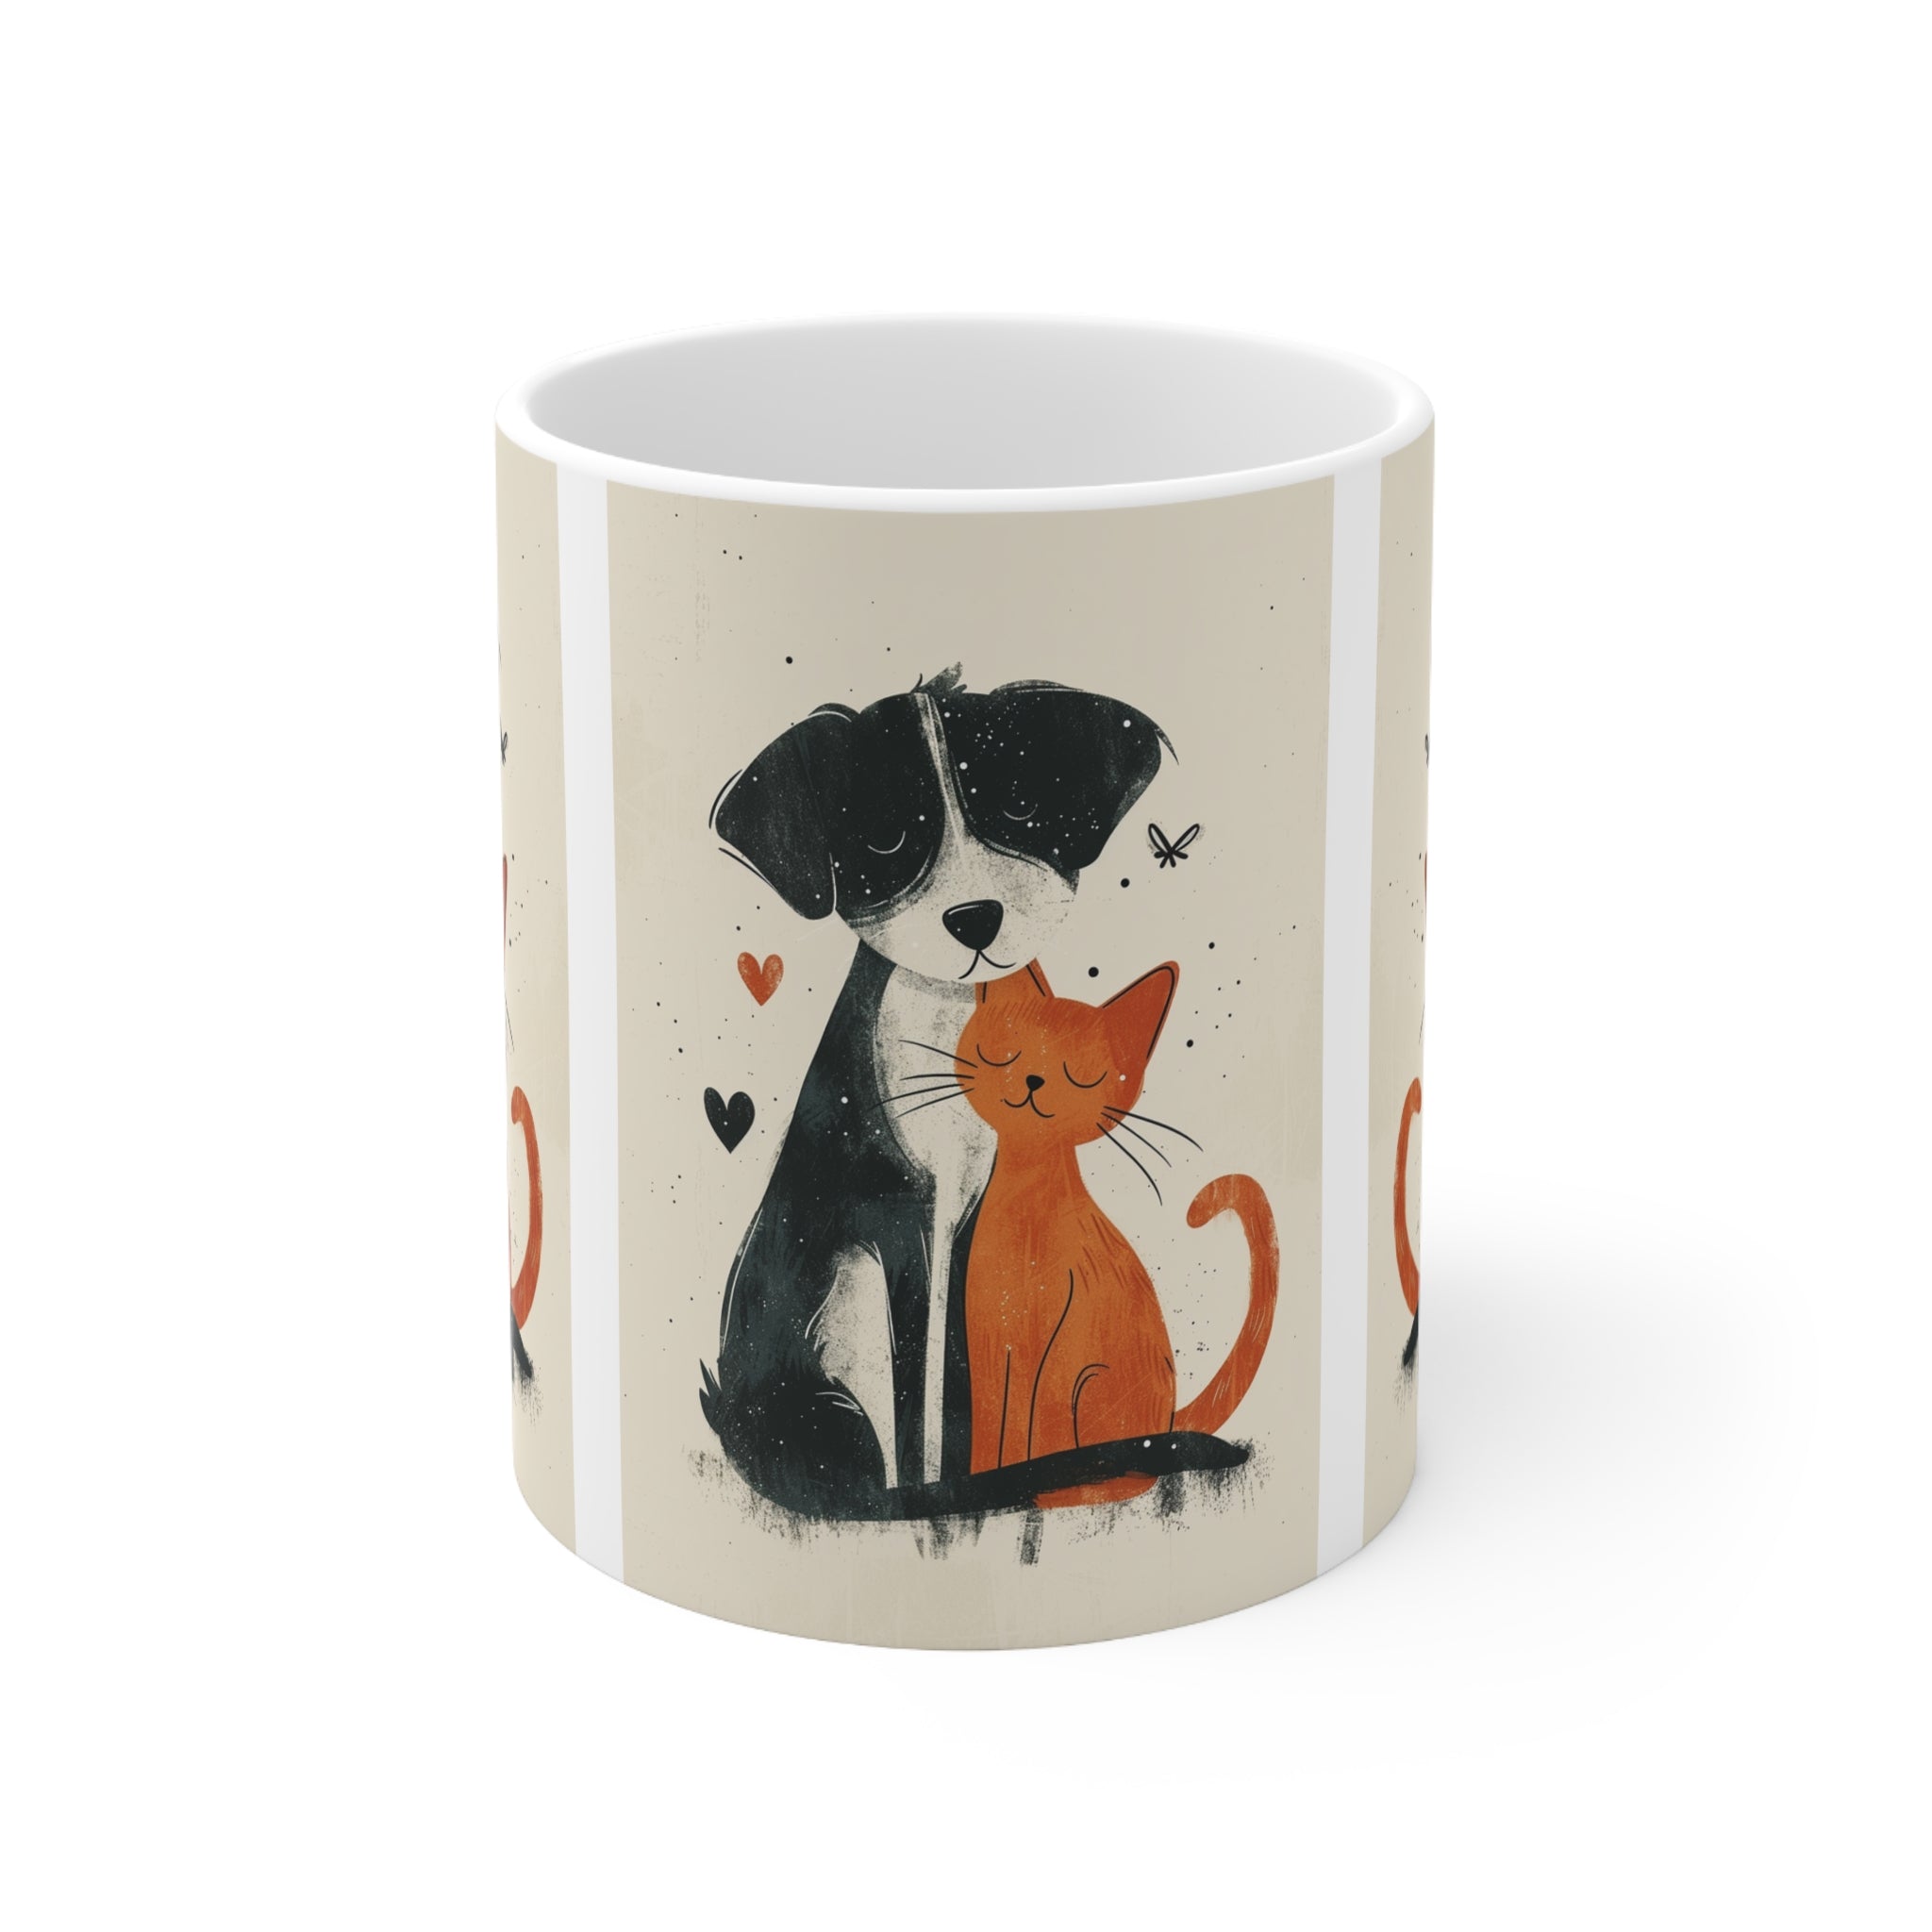 Feline and Canine Best Mates Ceramic Mug 11oz - Adorable Cat and Dog Friendship Coffee Cup Gift for Pet Owners and Animal Lovers Who Love Coffee